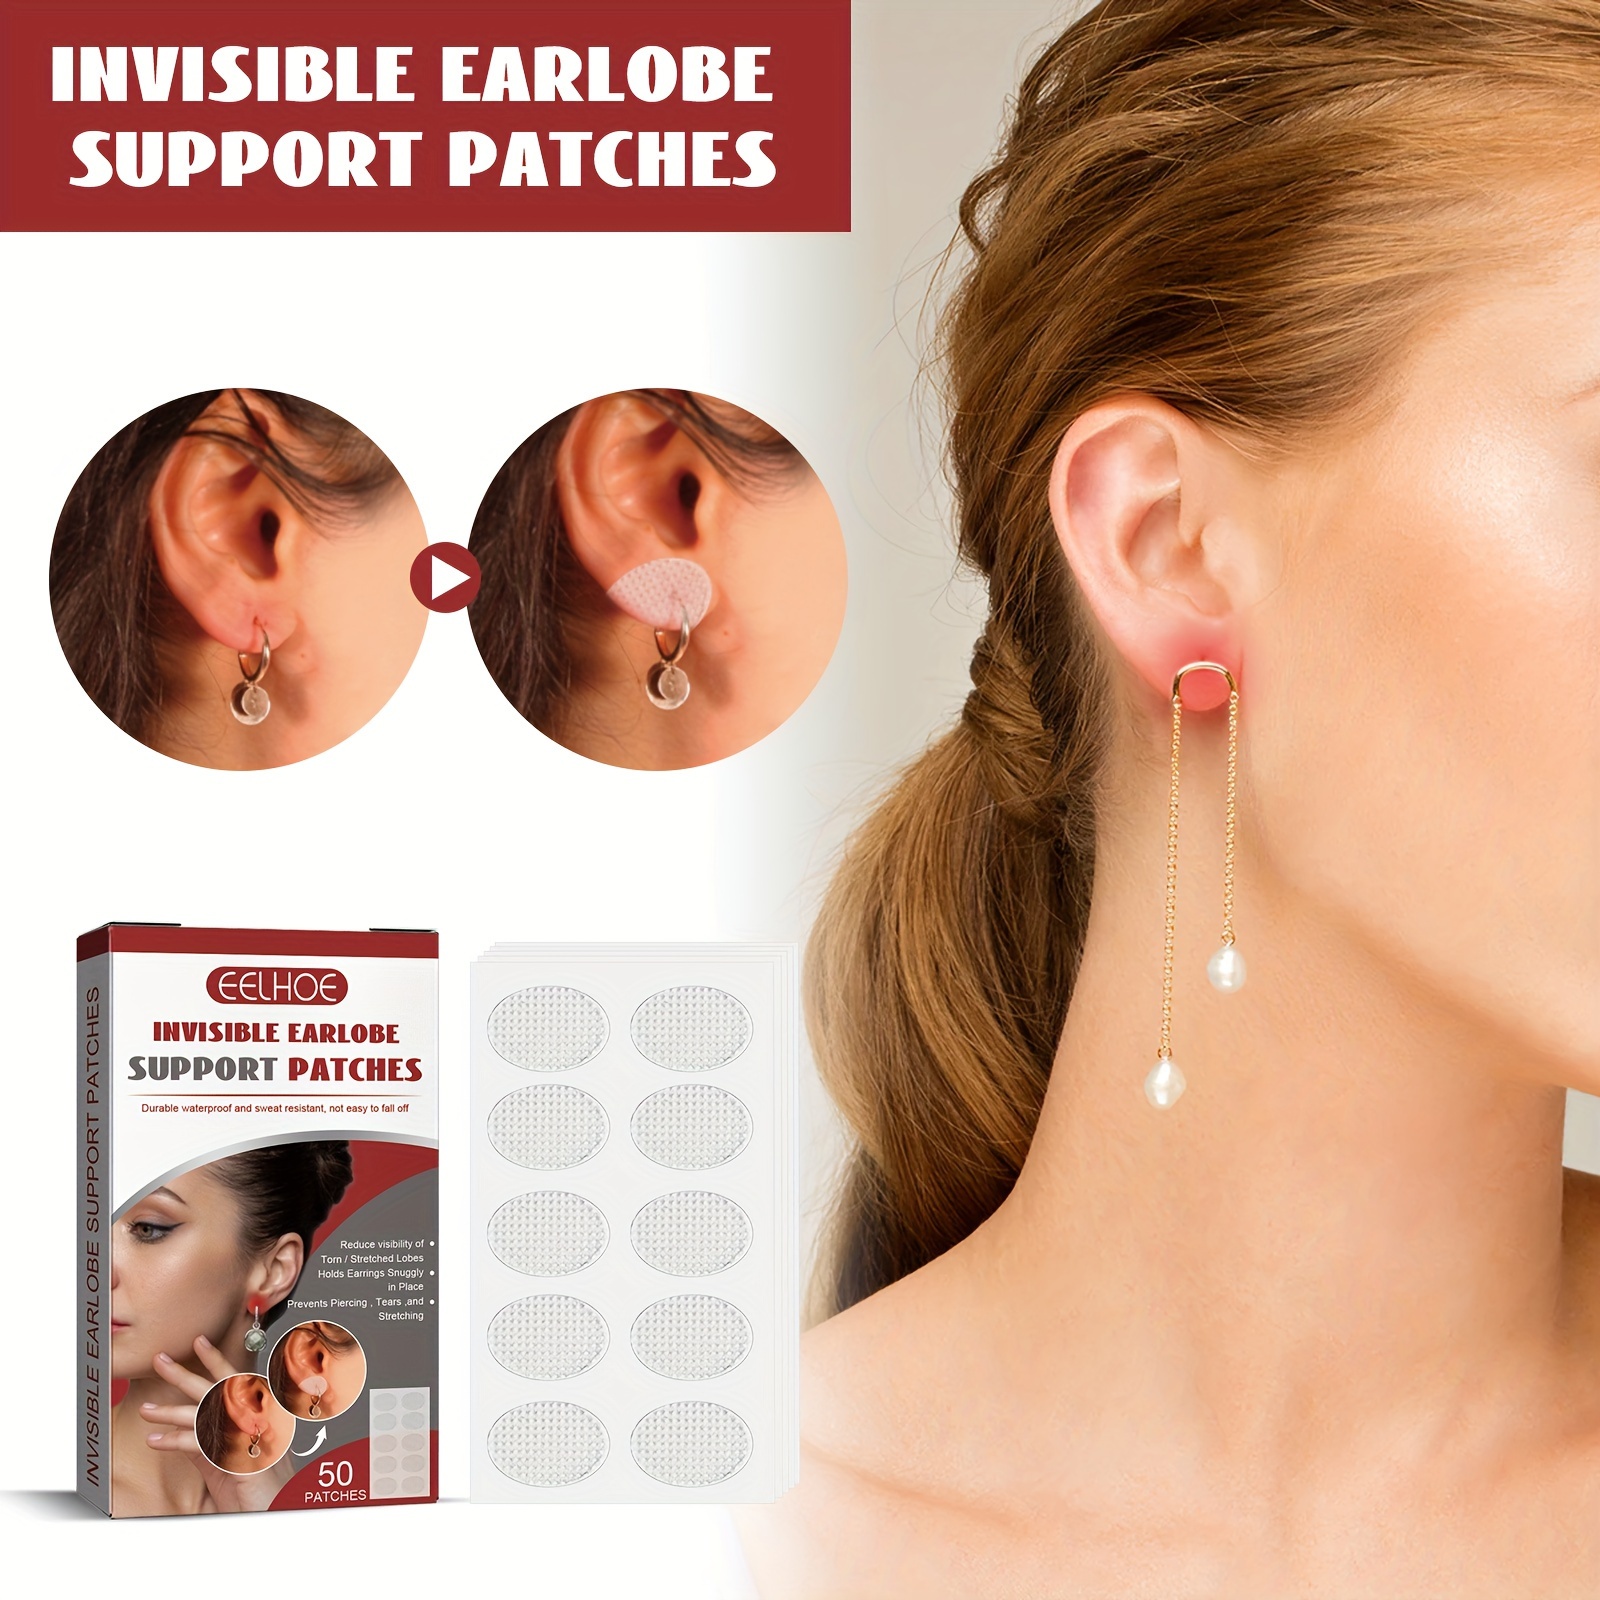 50pcs Ear Lobe Support Patches Invisible Ear Patches Large Earring Lift  Patches For Earrings, Check Out Today's Deals Now